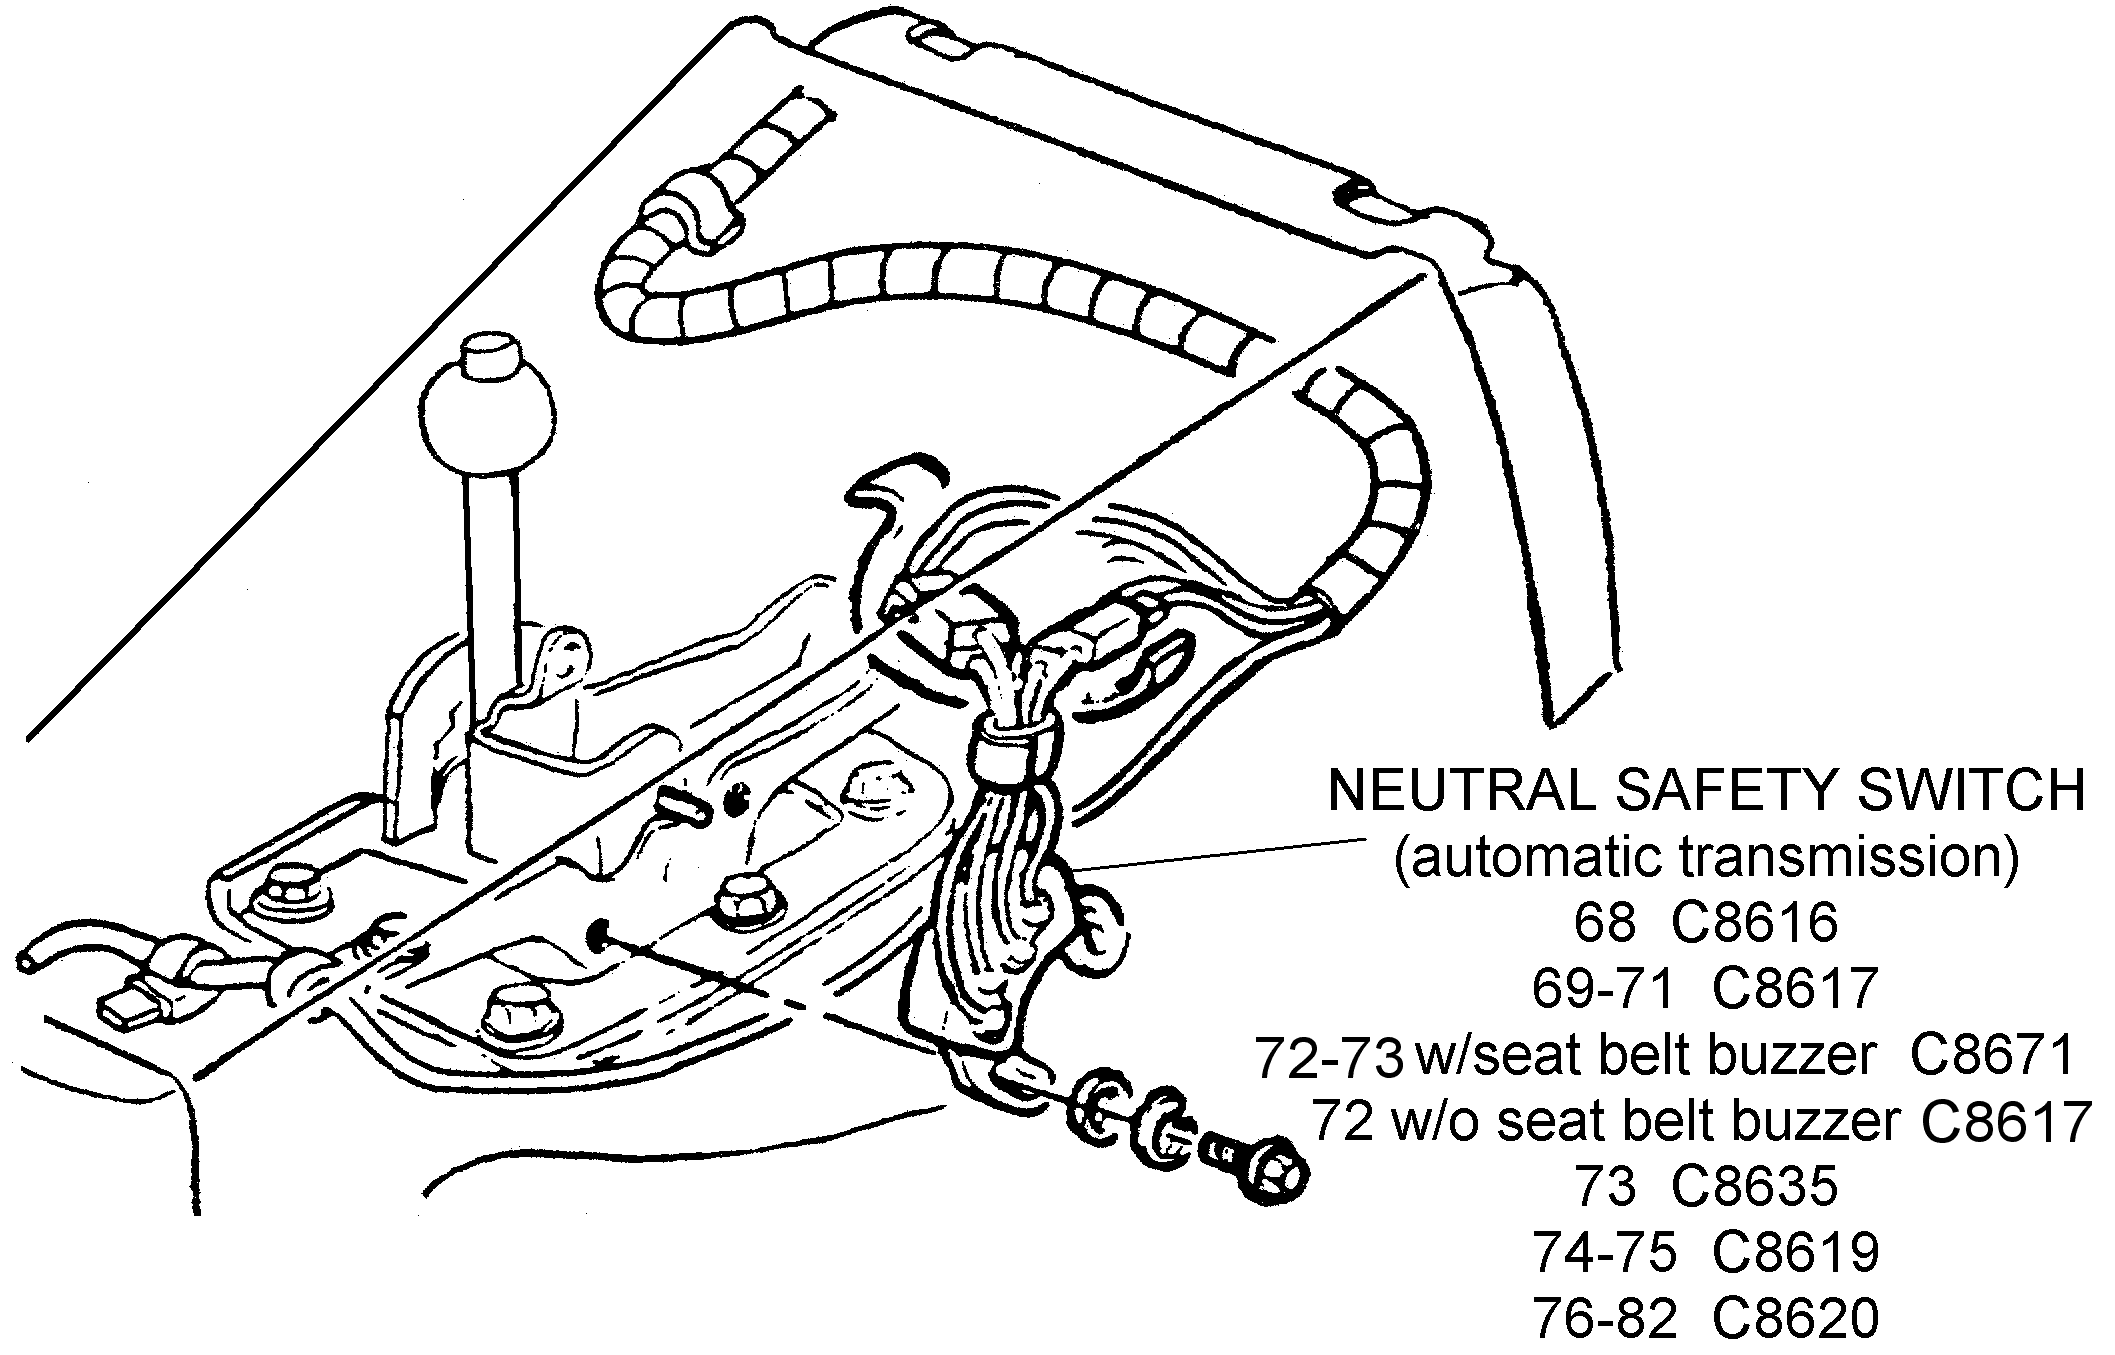 Neutral Safety Switch - Diagram View - Chicago Corvette Supply.